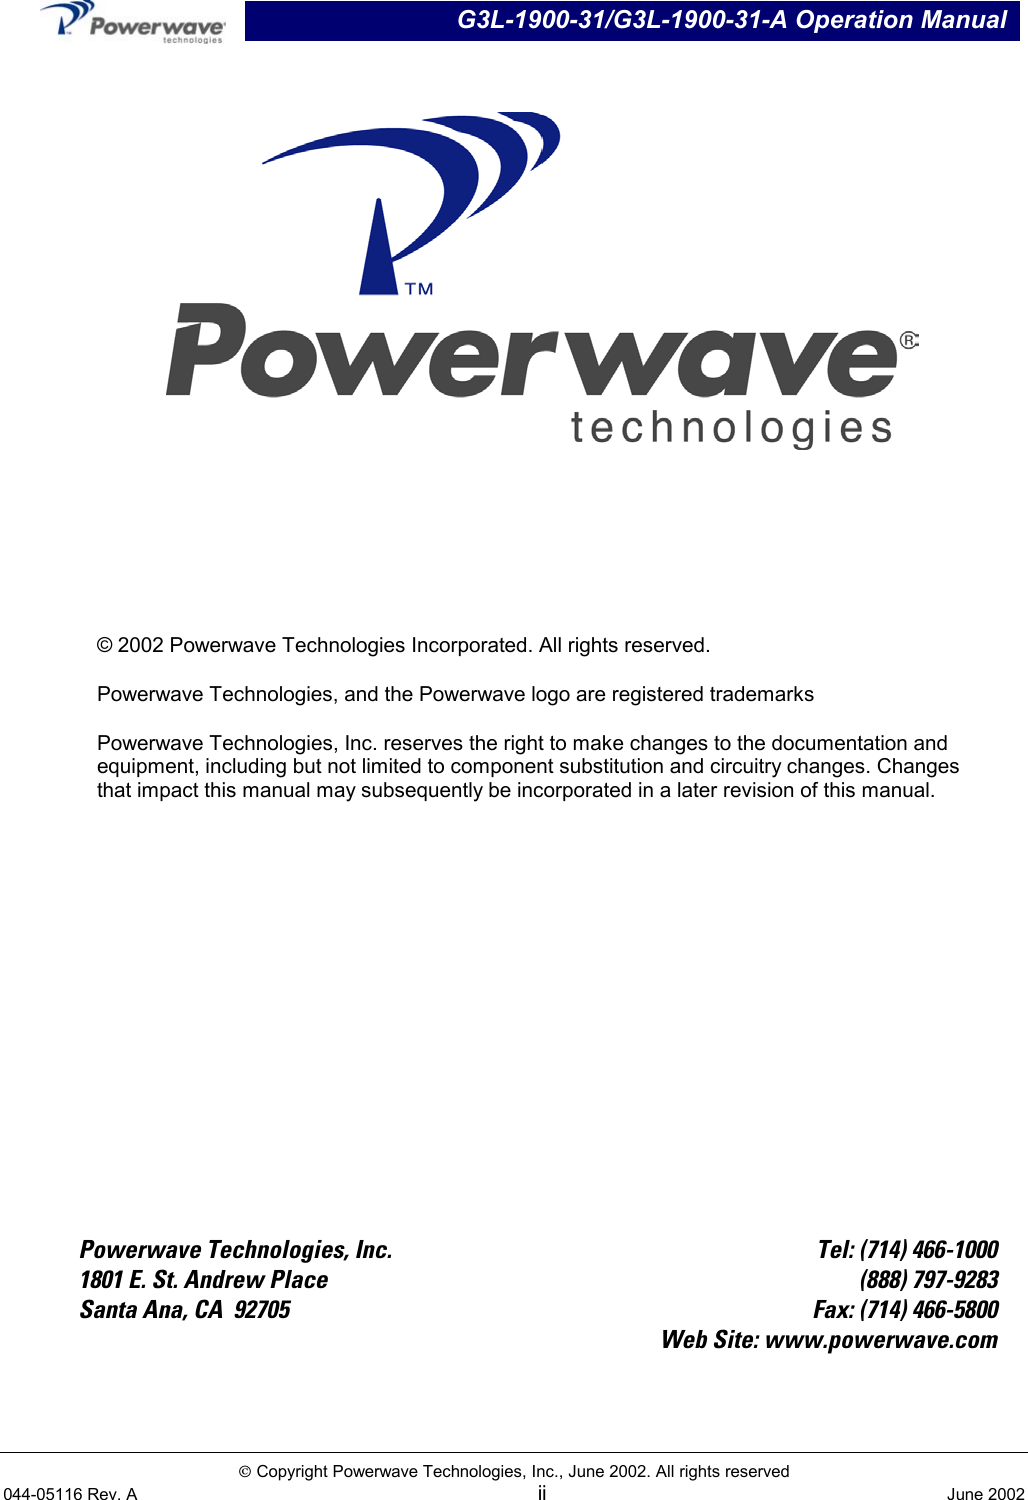 G3L-1900-31/G3L-1900-31-A Operation ManualÓ Copyright Powerwave Technologies, Inc., June 2002. All rights reserved044-05116 Rev. A ii June 2002Powerwave Technologies, Inc. Tel: (714) 466-10001801 E. St. Andrew Place (888) 797-9283Santa Ana, CA  92705 Fax: (714) 466-5800Web Site: www.powerwave.com© 2002 Powerwave Technologies Incorporated. All rights reserved.Powerwave Technologies, and the Powerwave logo are registered trademarksPowerwave Technologies, Inc. reserves the right to make changes to the documentation andequipment, including but not limited to component substitution and circuitry changes. Changesthat impact this manual may subsequently be incorporated in a later revision of this manual.